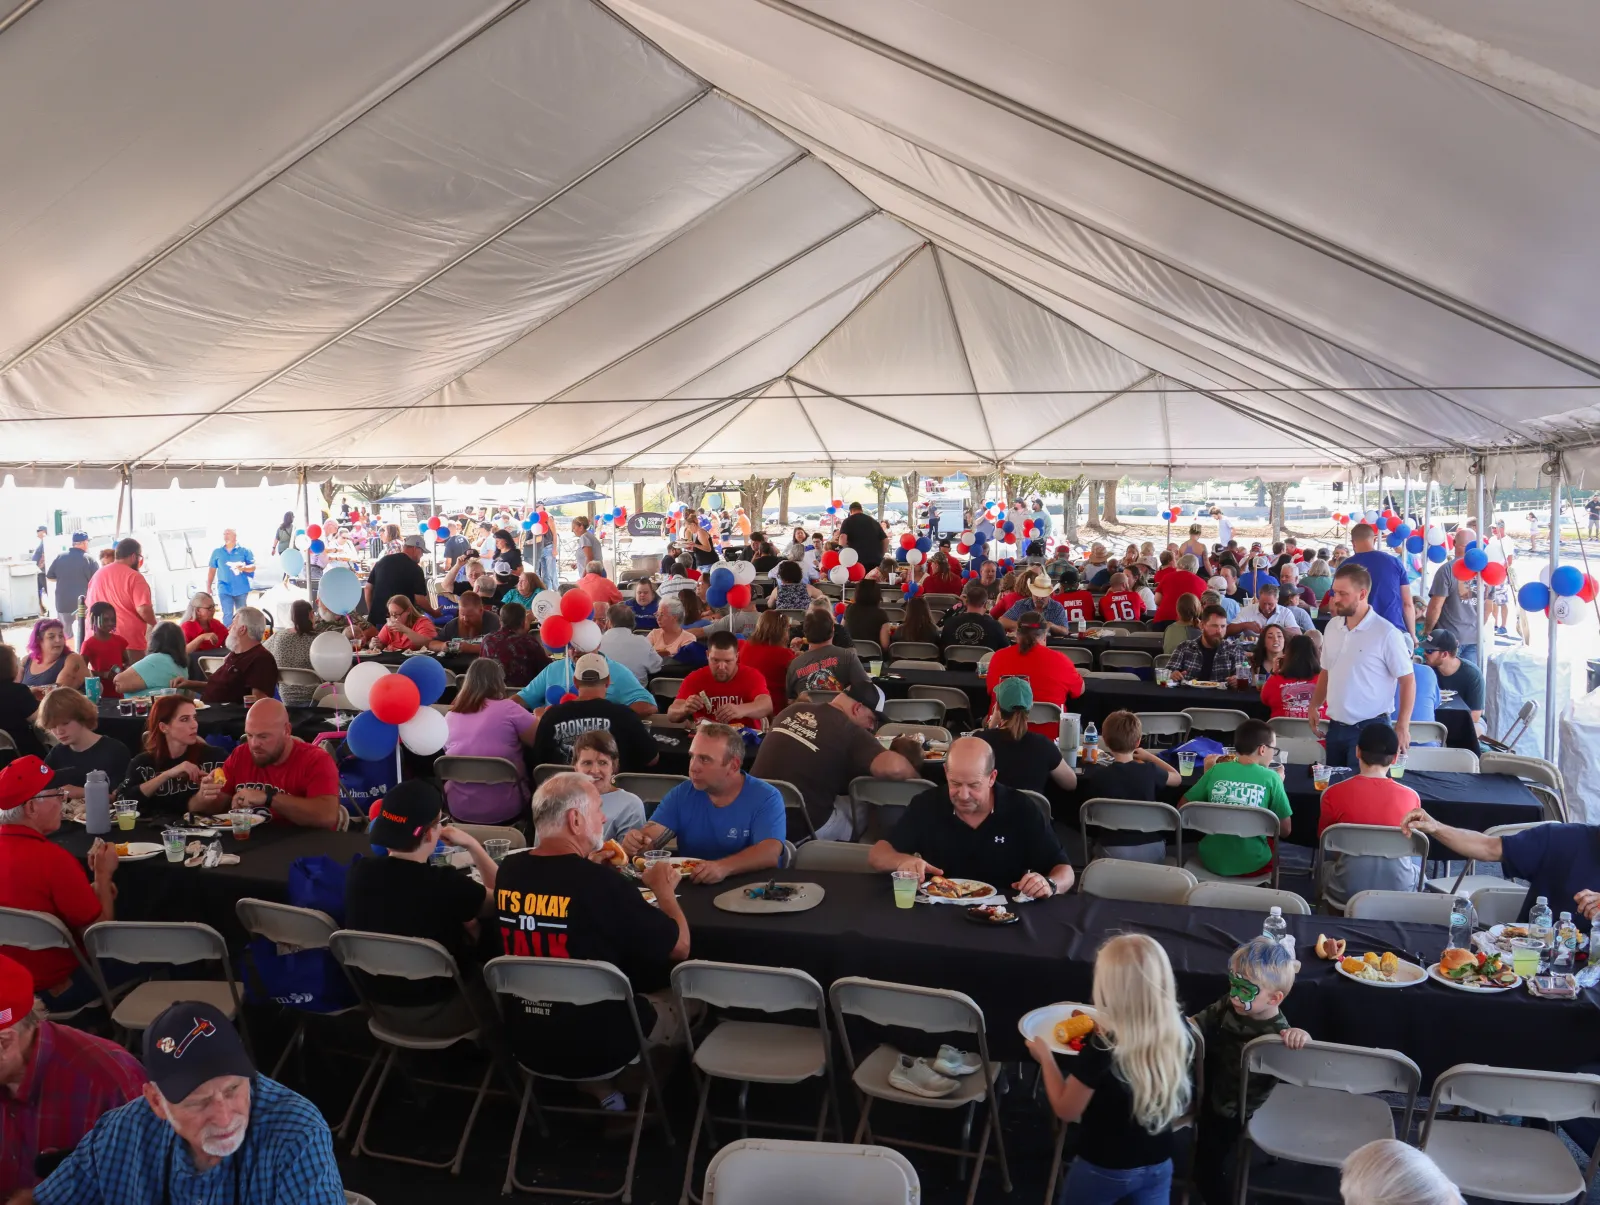 a large crowd of people sitting at tables in a tent